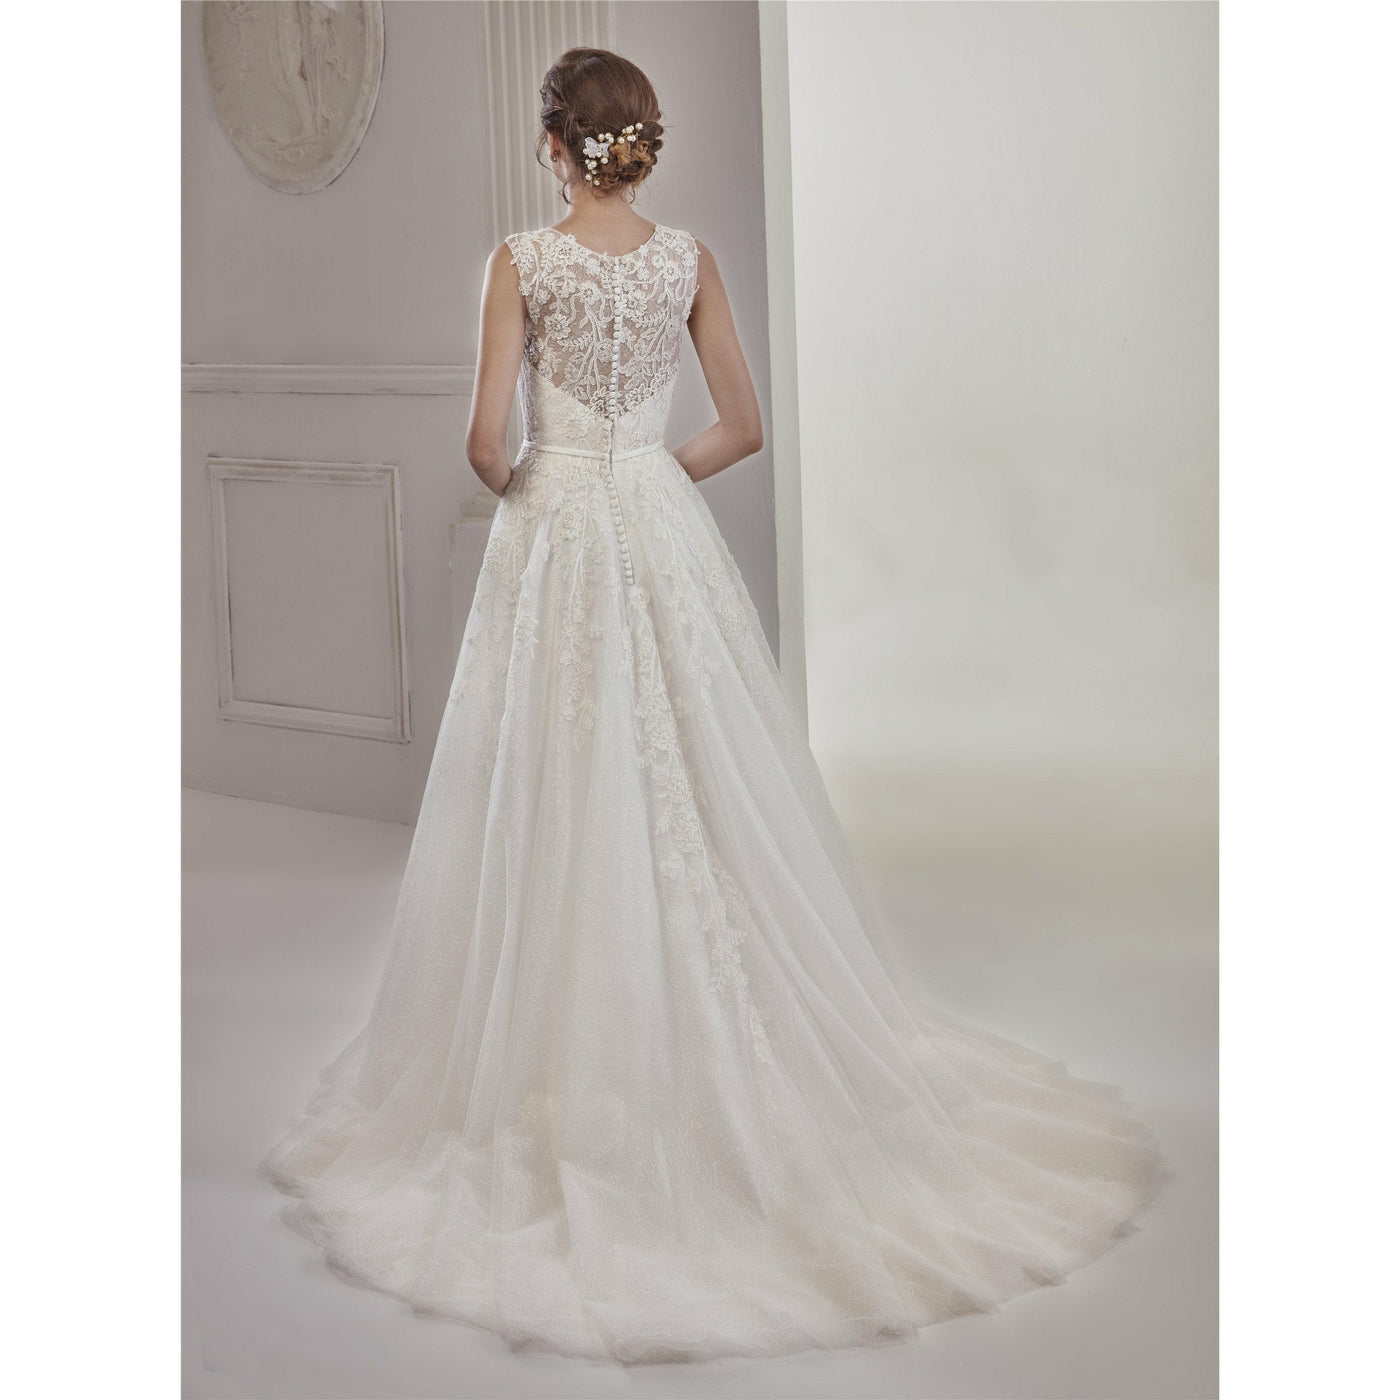 Chicely Chantilly Lace Illusion sweetheart wedding dress2